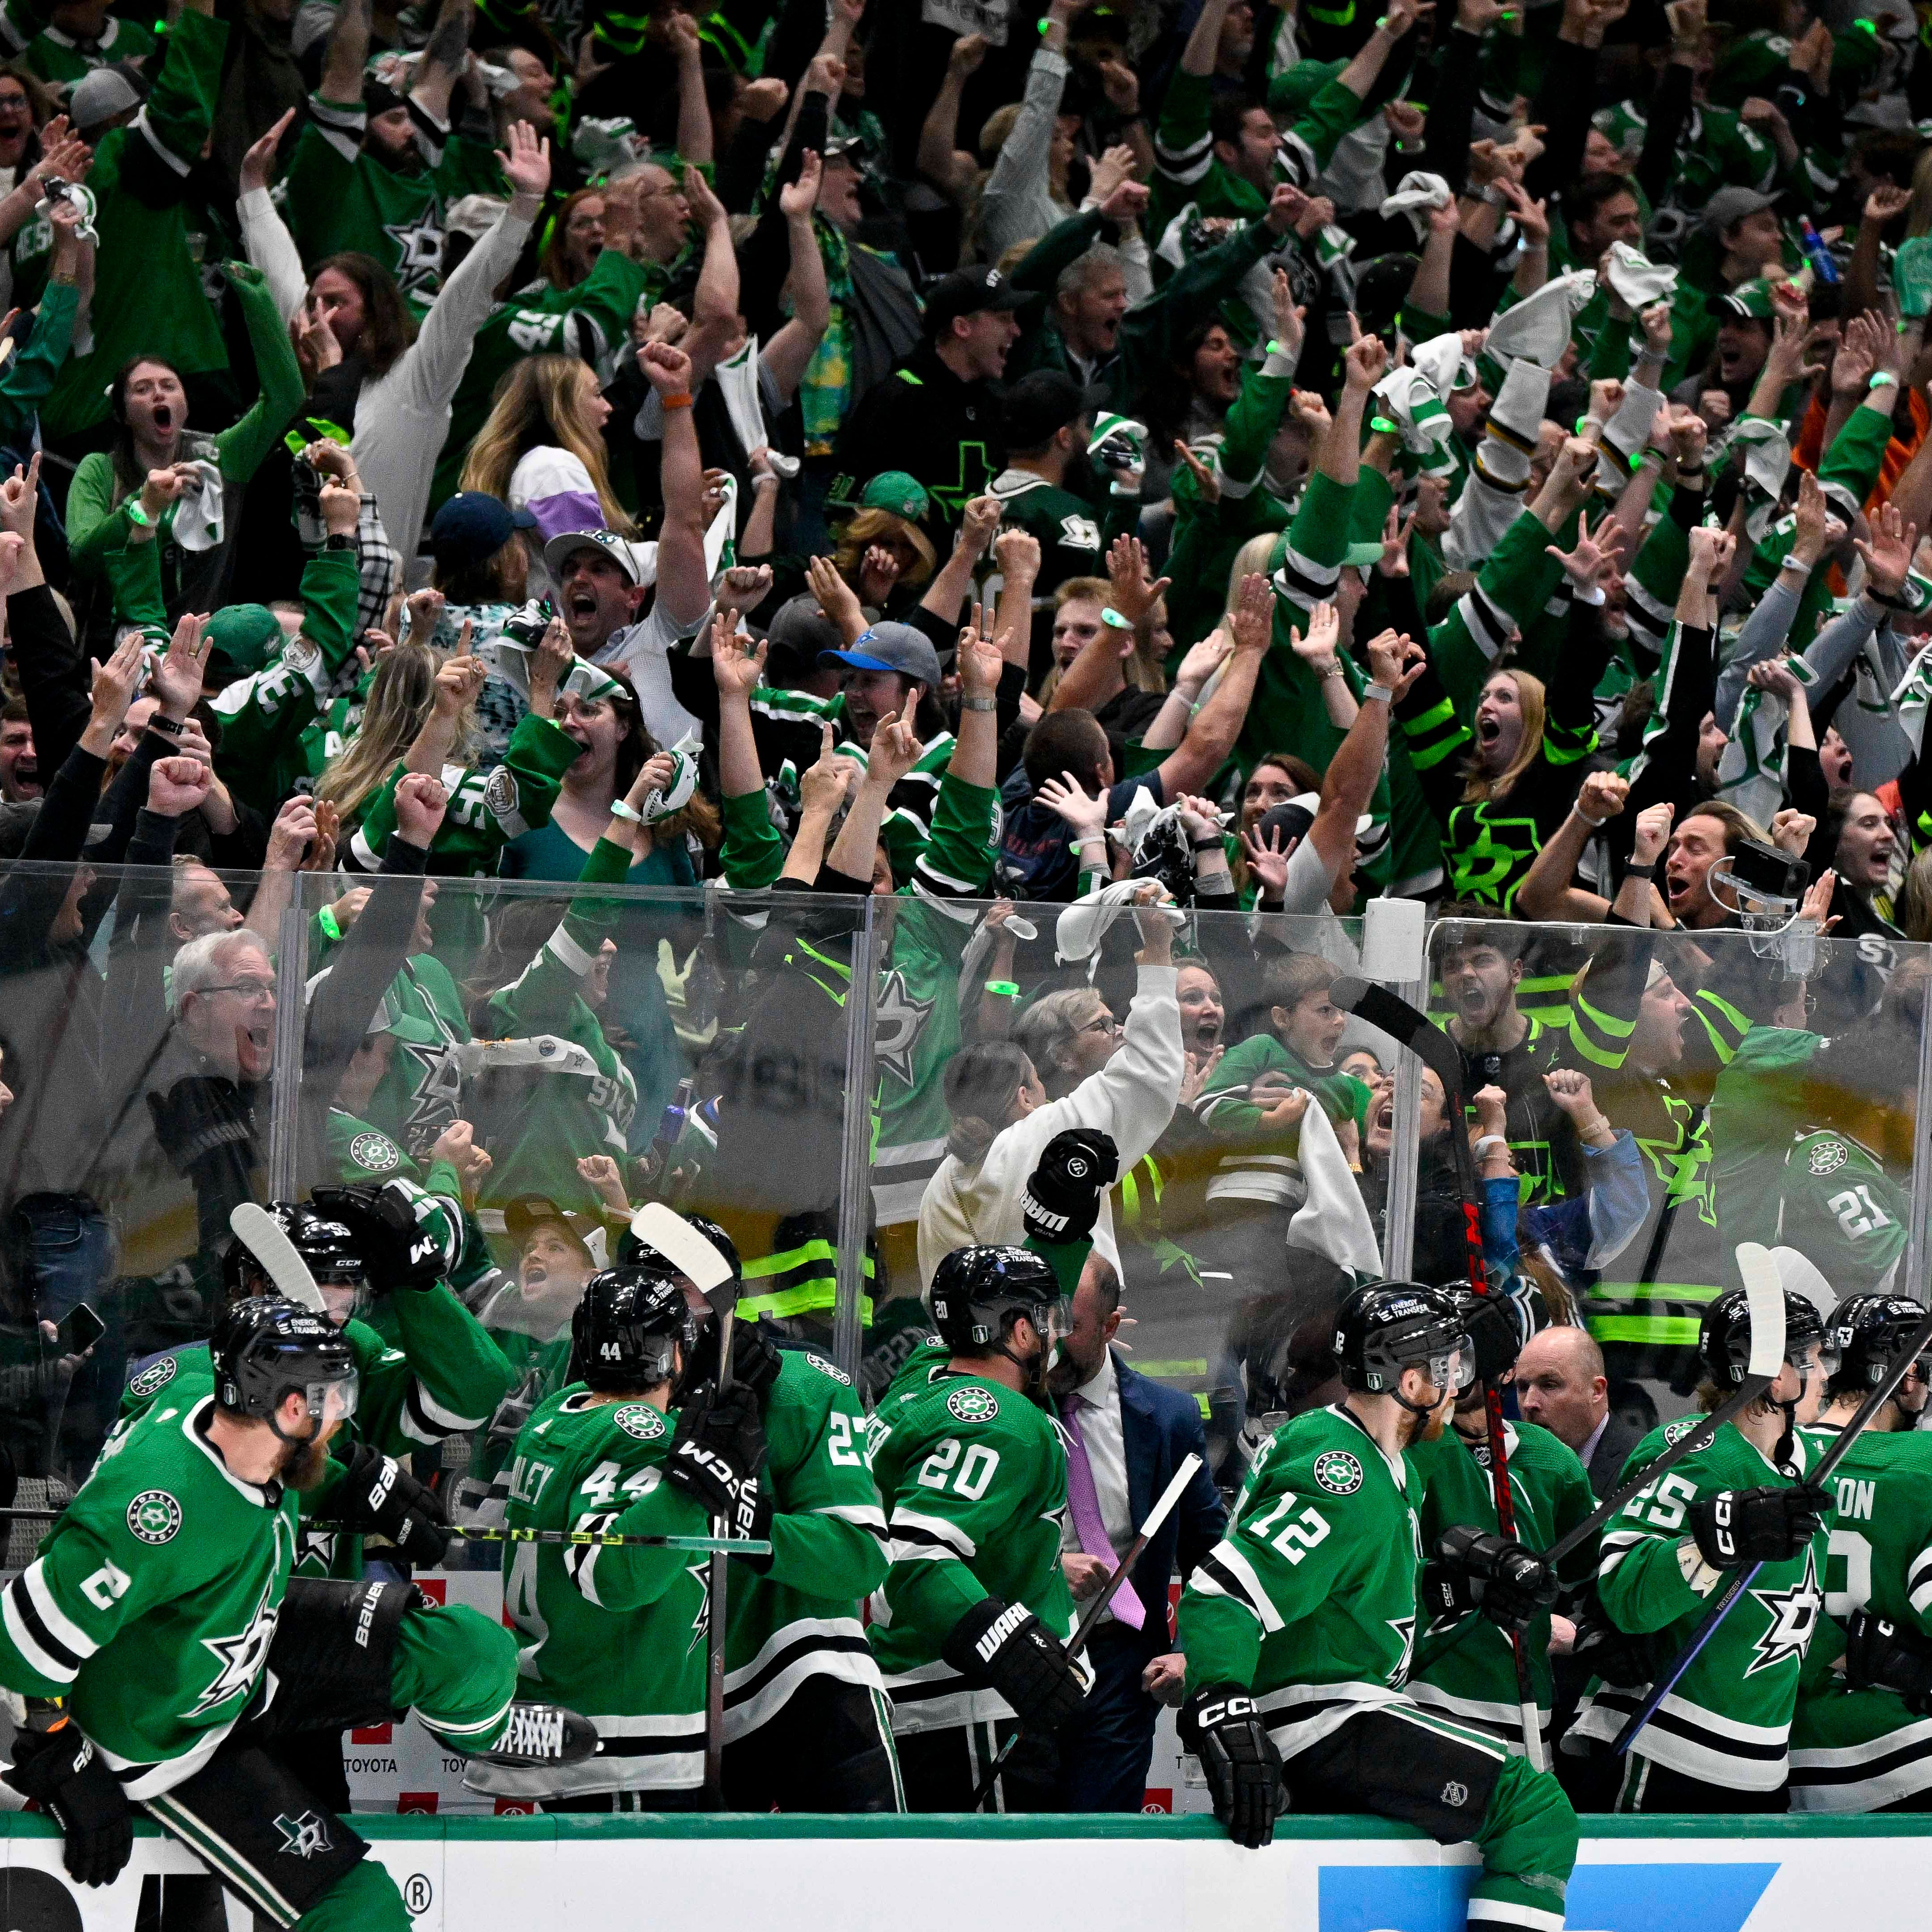 Game 4: The Dallas Stars fans and bench celebrate after center Joe Pavelski scores in overtime to stay alive against the Vegas Golden Knights.